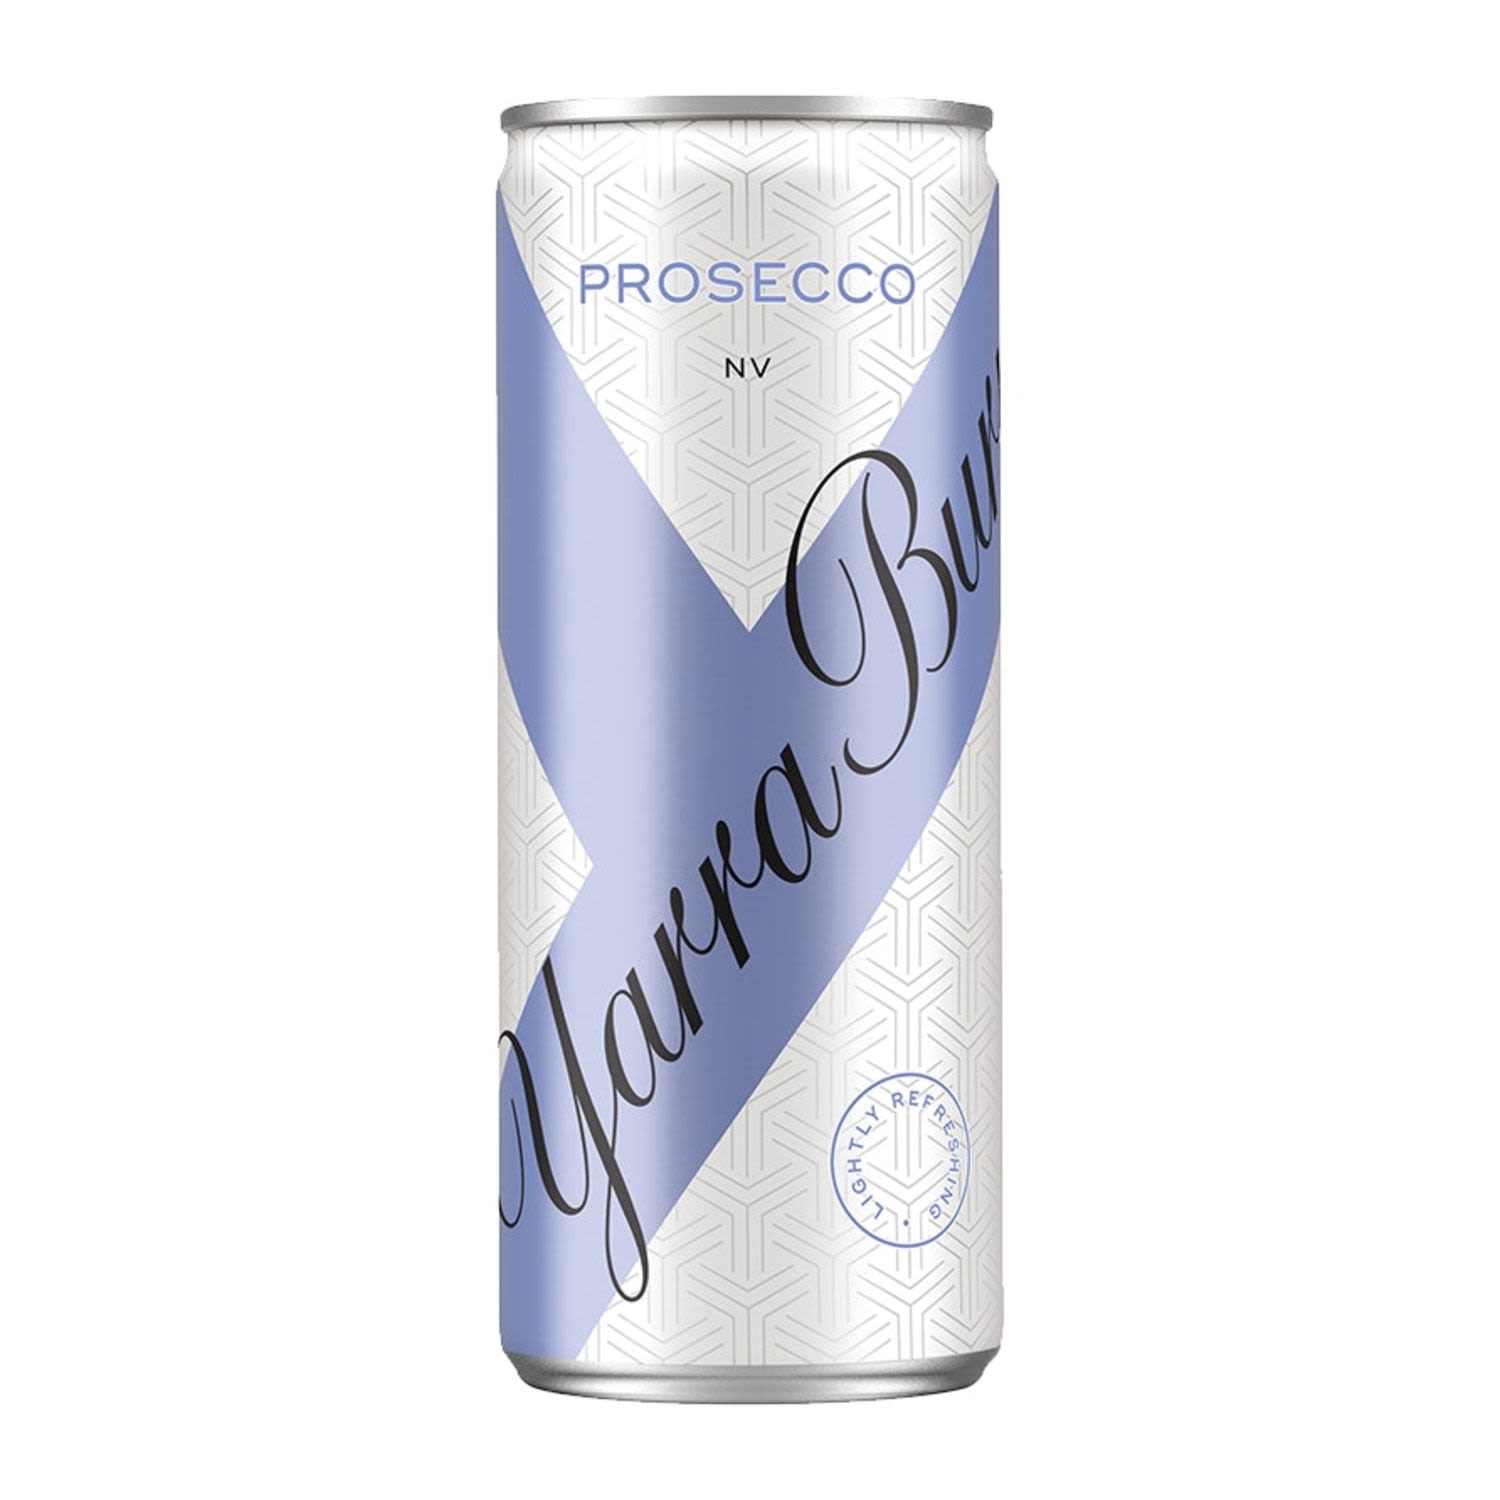 Yarra Burn Prosecco has a refreshing appeal with crunchy pear fruit characters & a crisp, fresh finish.<br /> <br />Alcohol Volume: 9.00%<br /><br />Pack Format: Can<br /><br />Standard Drinks: 1.8</br /><br />Pack Type: Can<br /><br />Country of Origin: Australia<br /><br />Region: South Eastern Australia<br /><br />Vintage: Non Vintage<br />